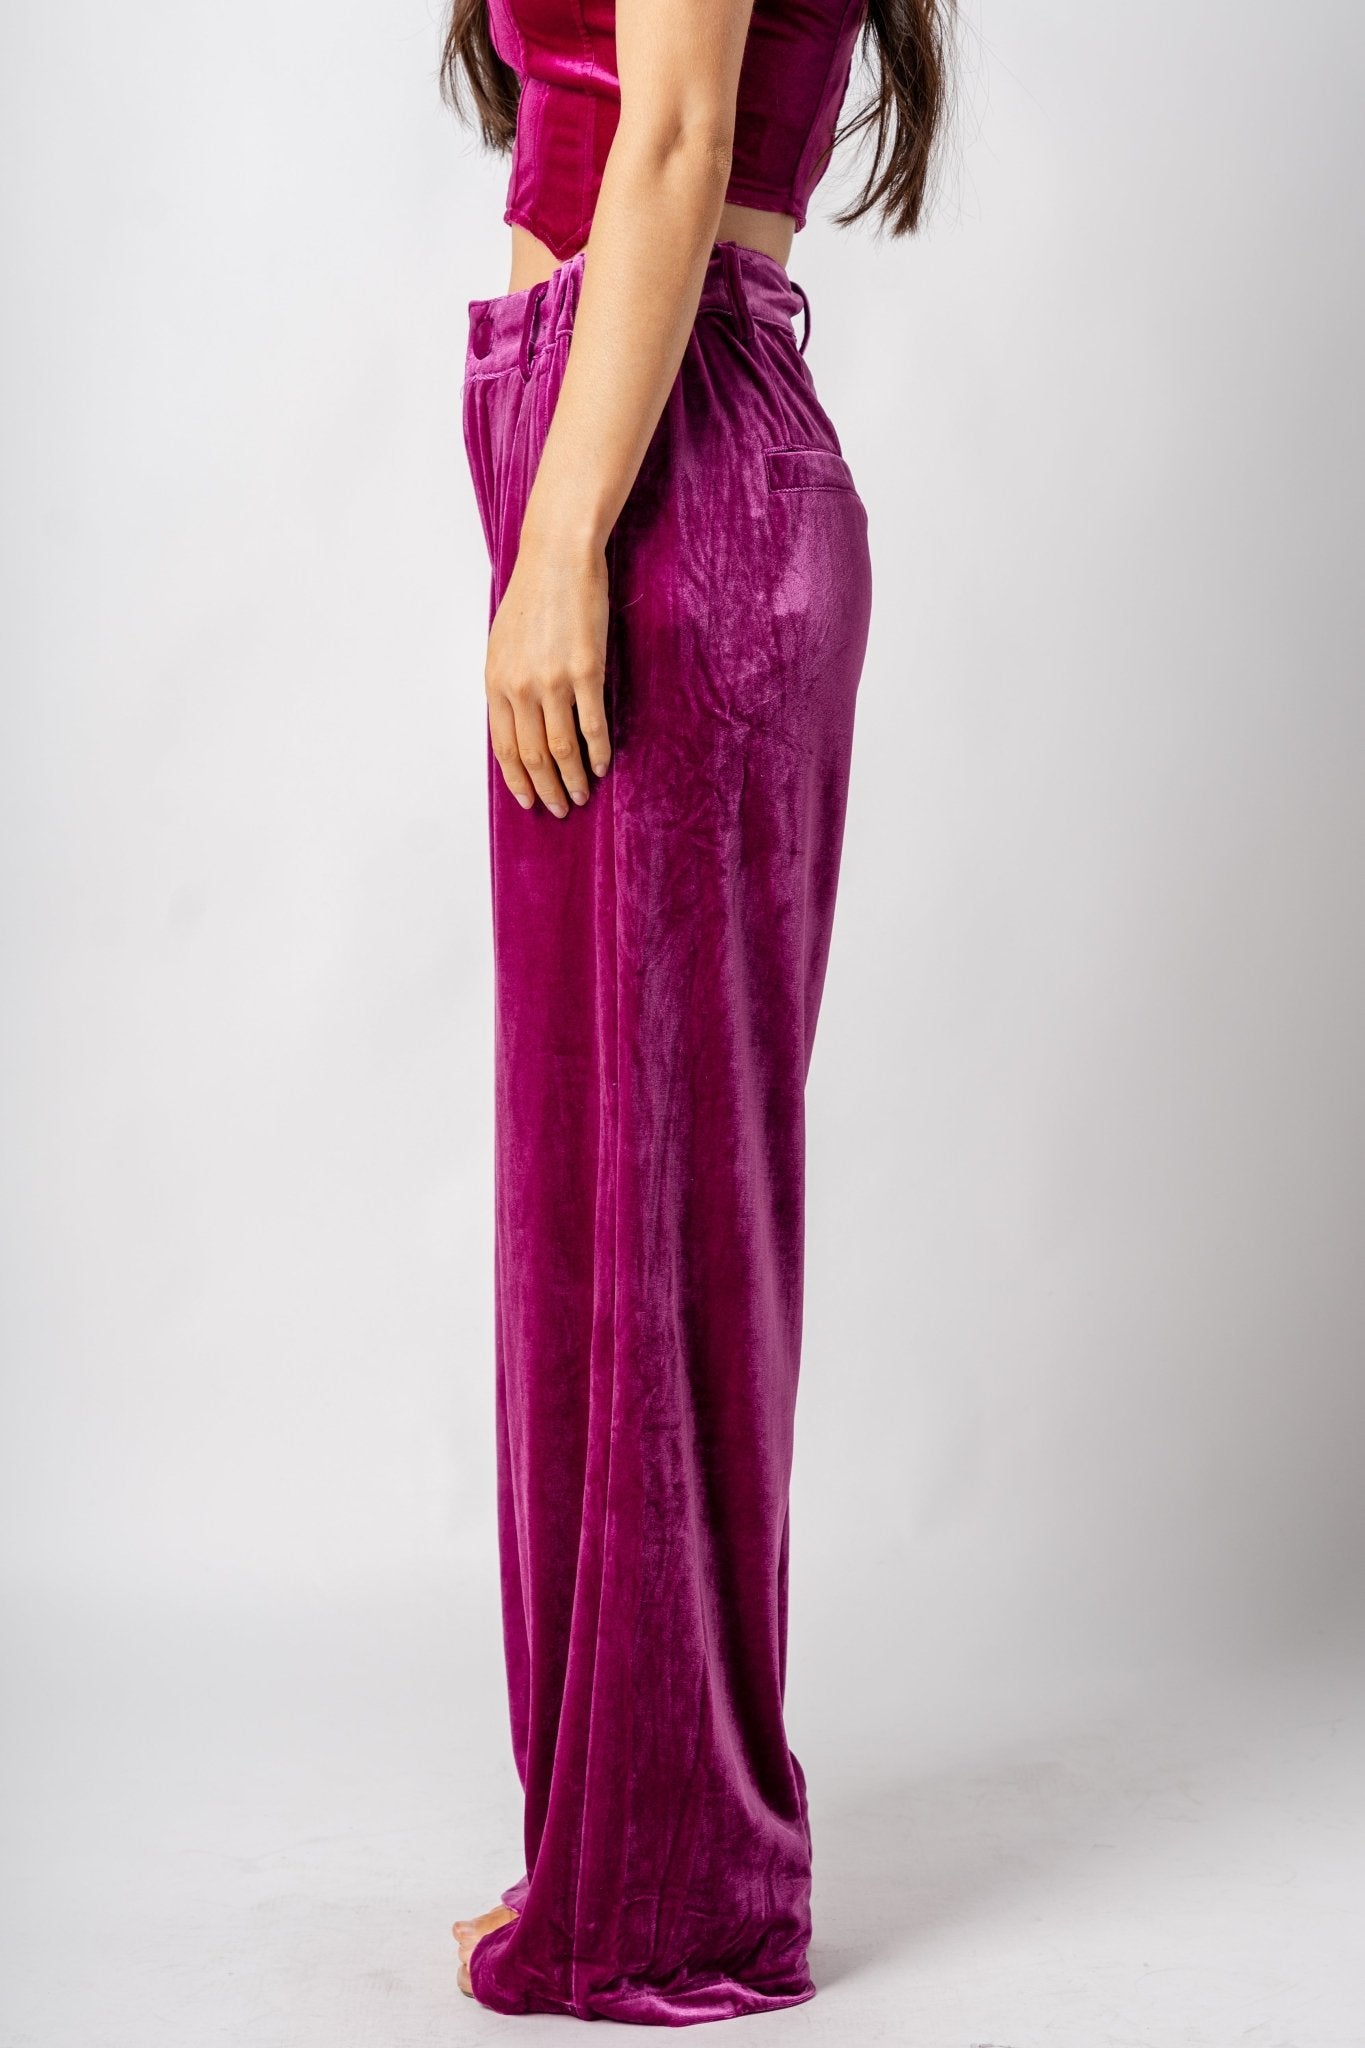 Velvet wide leg pants magenta - Trendy New Year's Eve Dresses, Skirts, Kimonos and Sequins at Lush Fashion Lounge Boutique in Oklahoma City